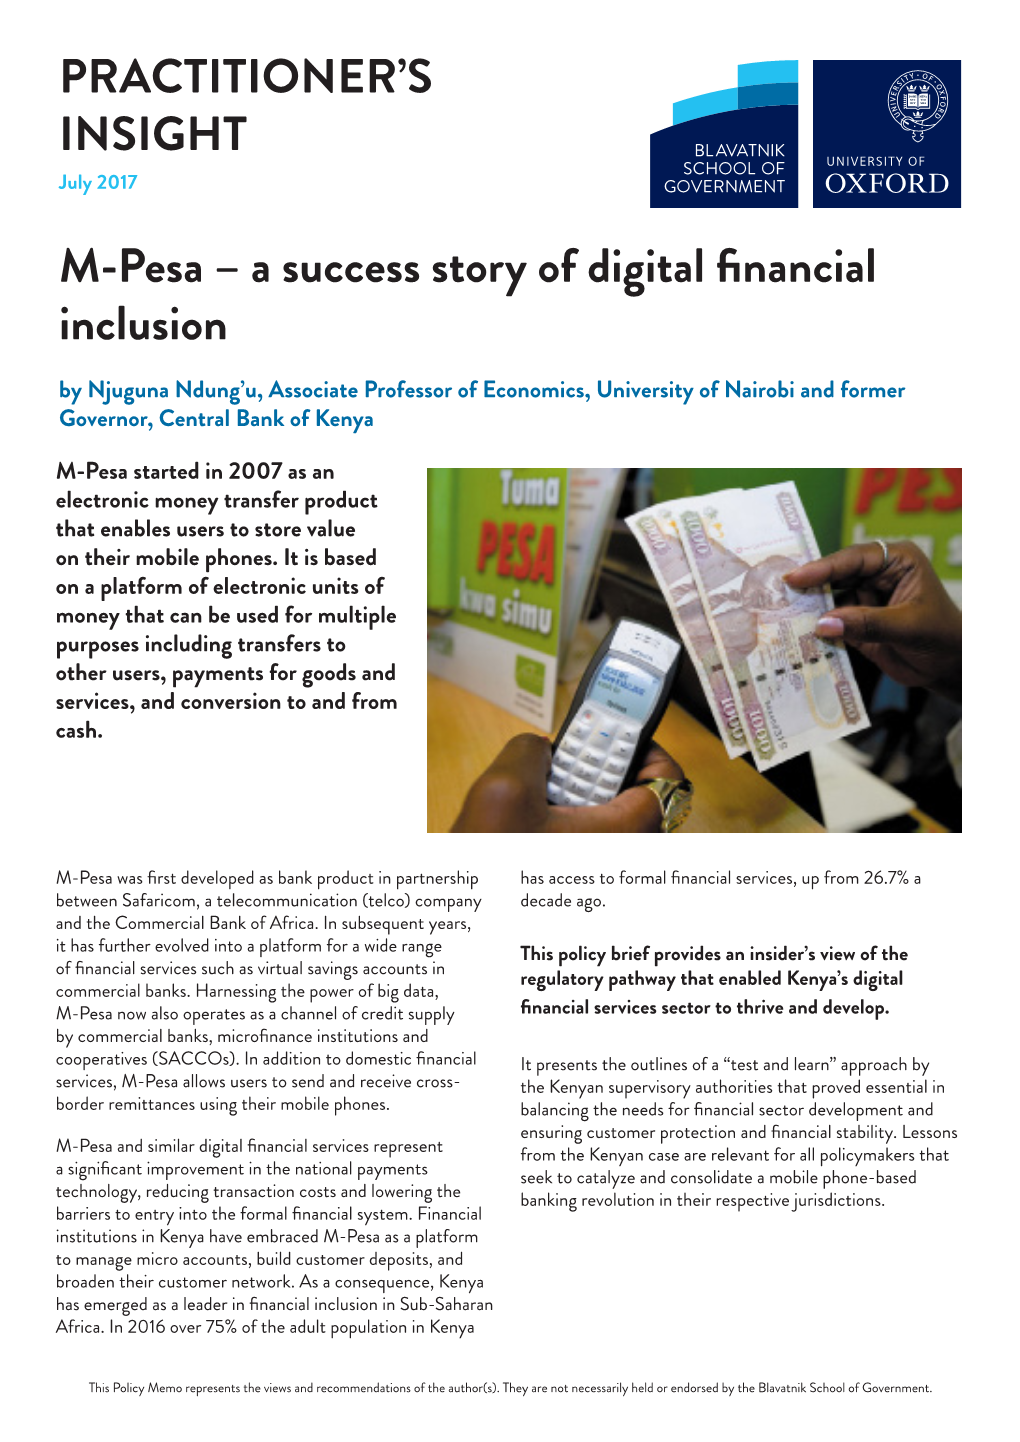 PRACTITIONER's INSIGHT M-Pesa – a Success Story of Digital Financial Inclusion